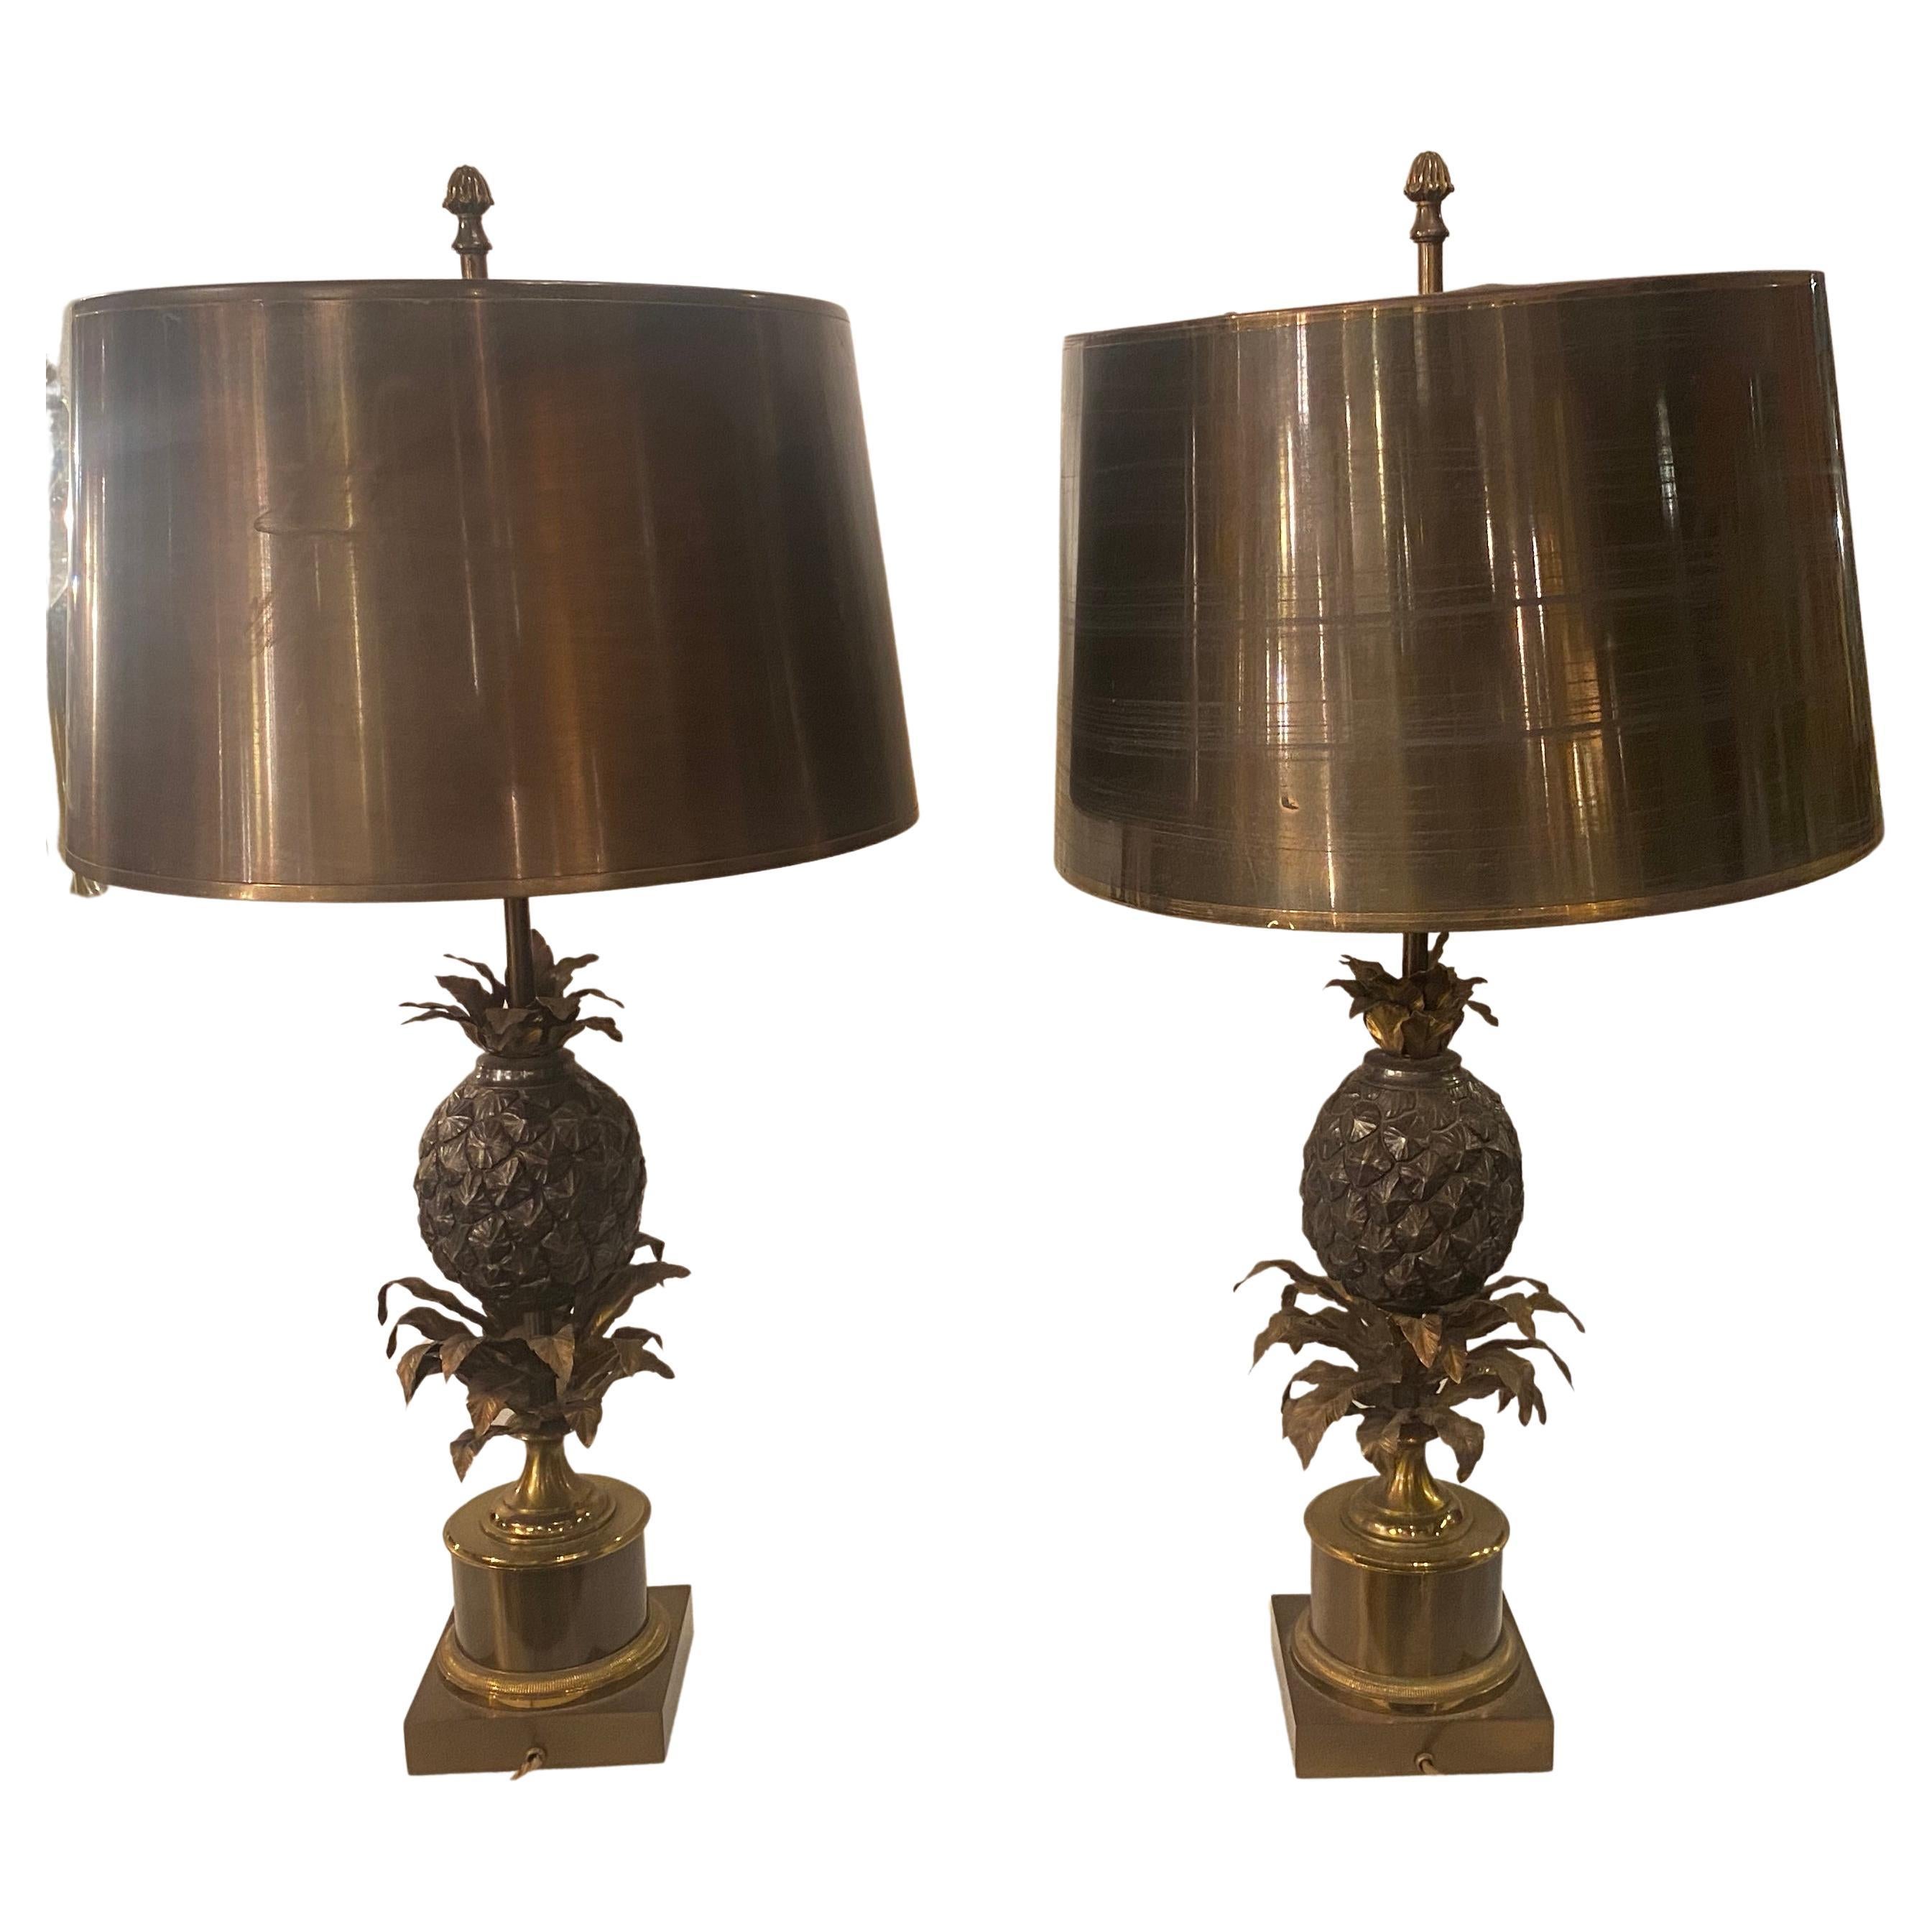 1950/70 Pair of Bronze Pineapple Lamps or Similar, Brass Shade, Signed Charles For Sale